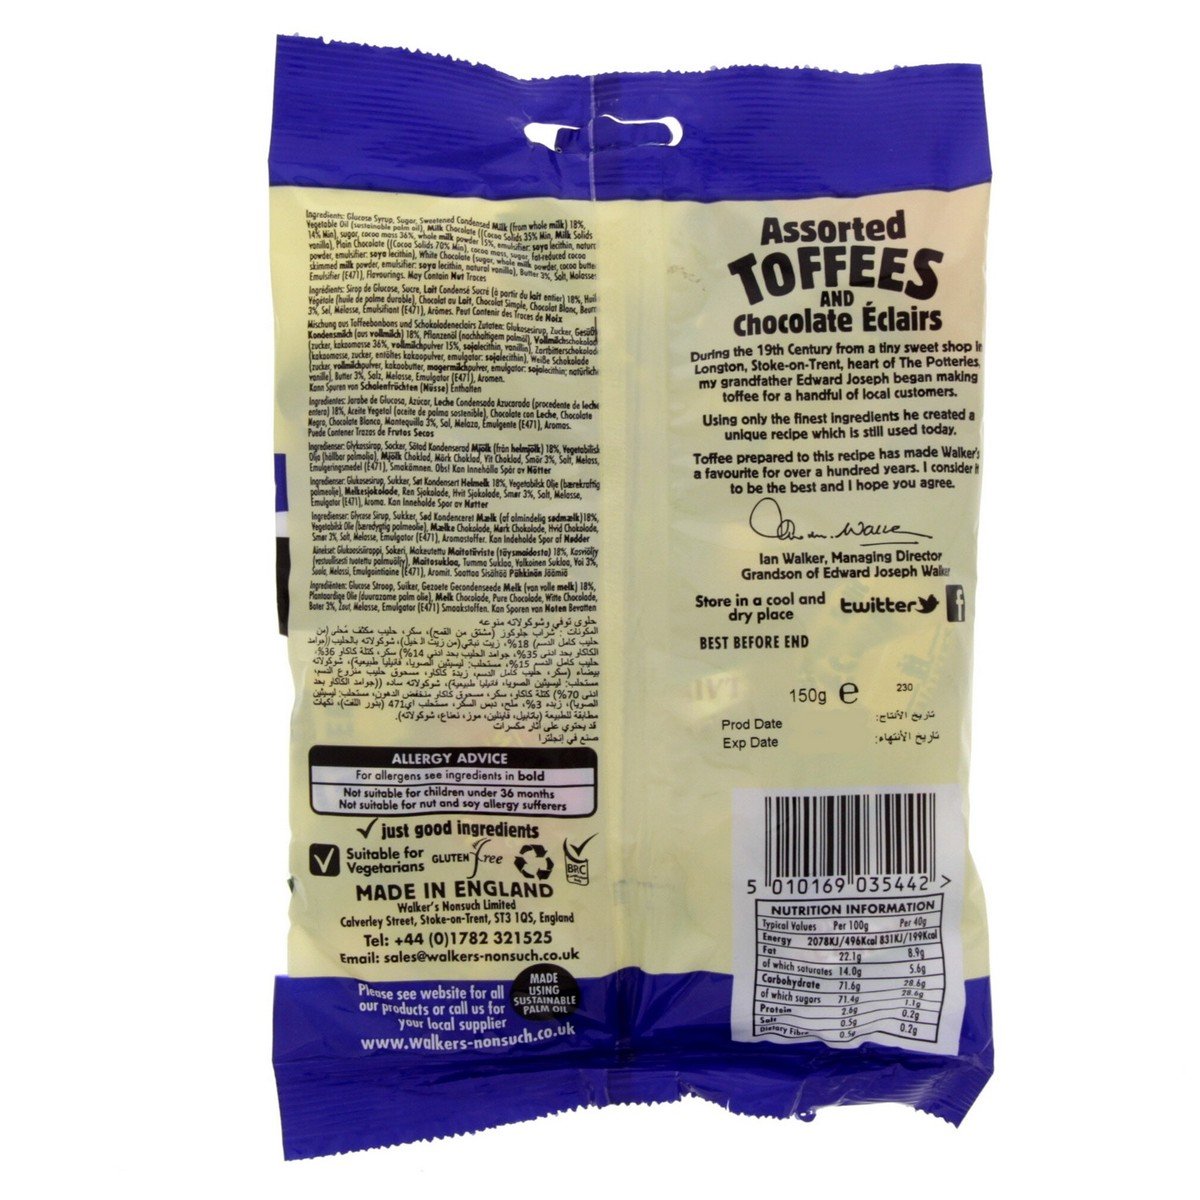 Walkers Assorted Toffees And Chocolate Eclairs 150 g